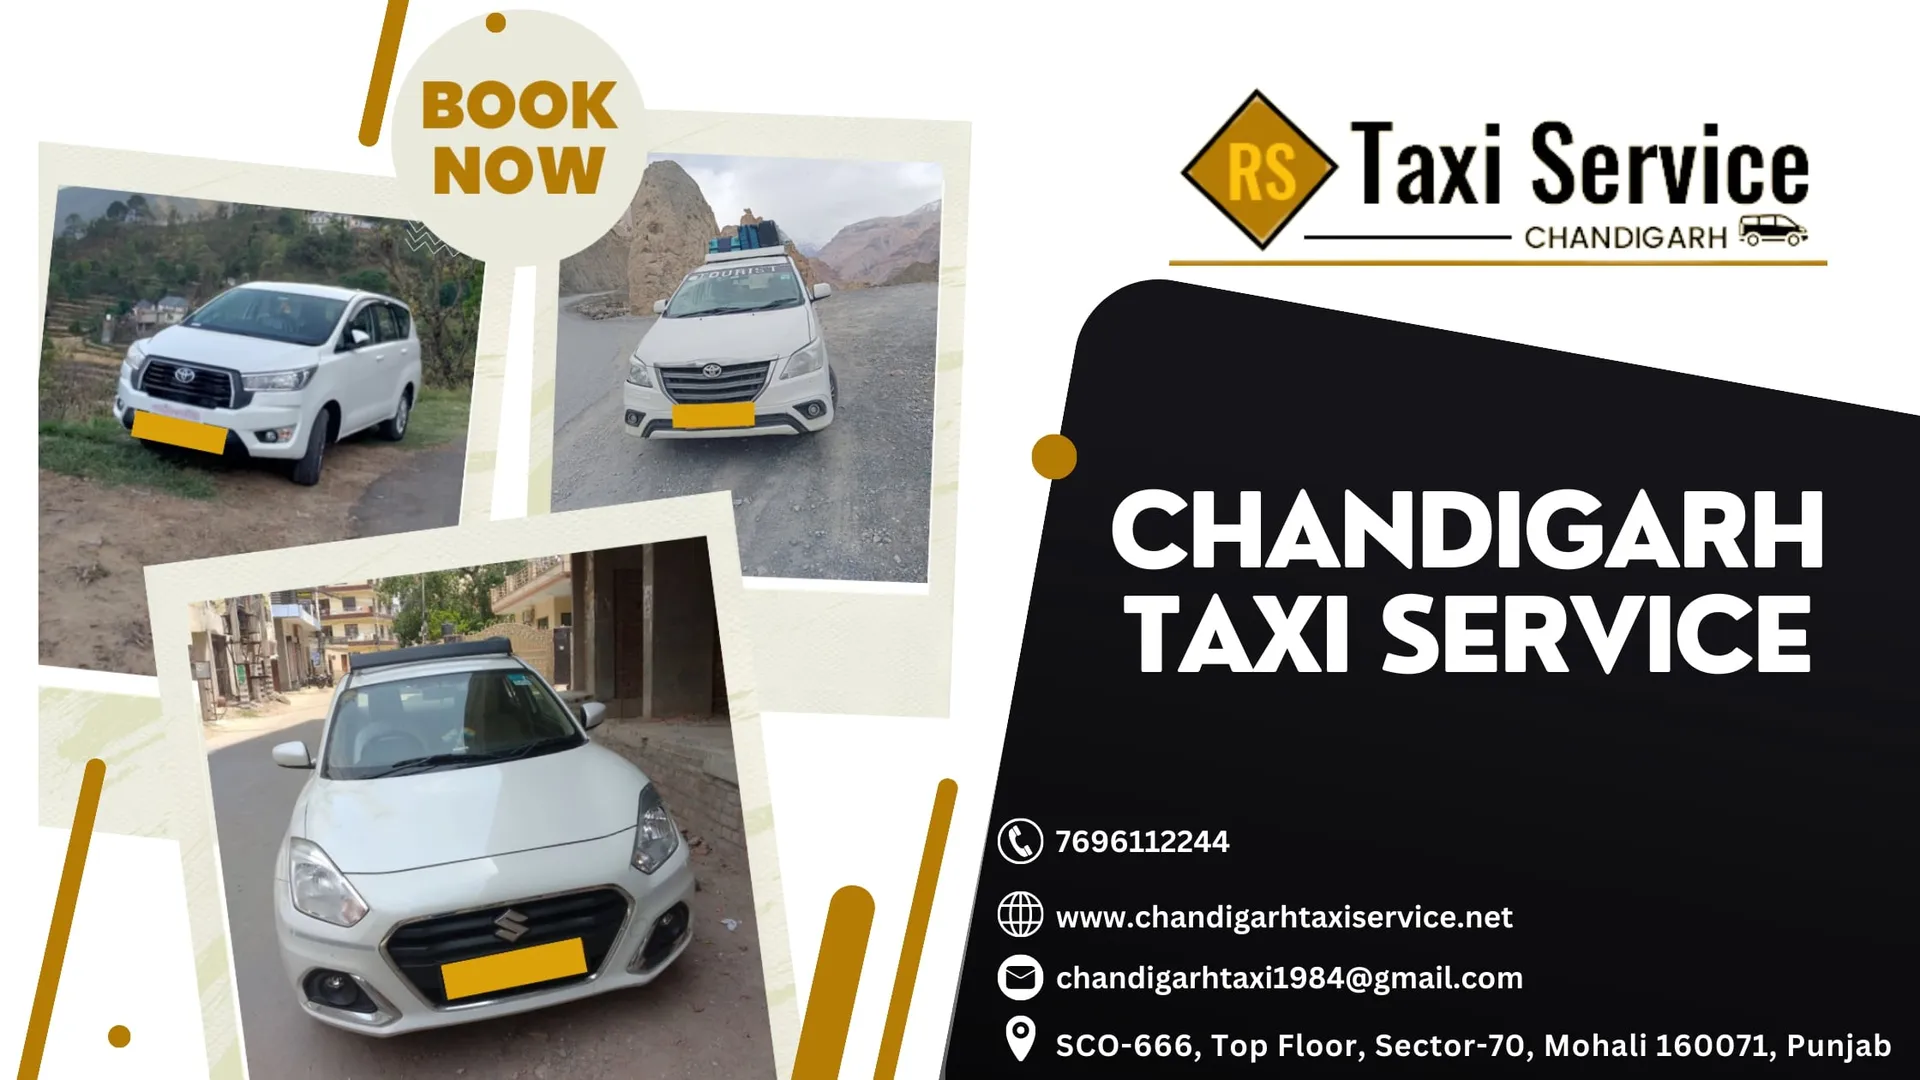 Introducing RS Taxi Service Chandigarh — your trusted companion for seamless transportation in the City Beautiful.

From airport transfers to local tours, our Chandigarh Taxi Service offers convenience tailored to your needs. Whether you’re a visitor eager to explore the city or a local in search of hassle-free commuting, RS Taxi Service Chandigarh is your pathway to comfort, style, and unmatched travel solutions. https://www.chandigarhtaxiservice.net/